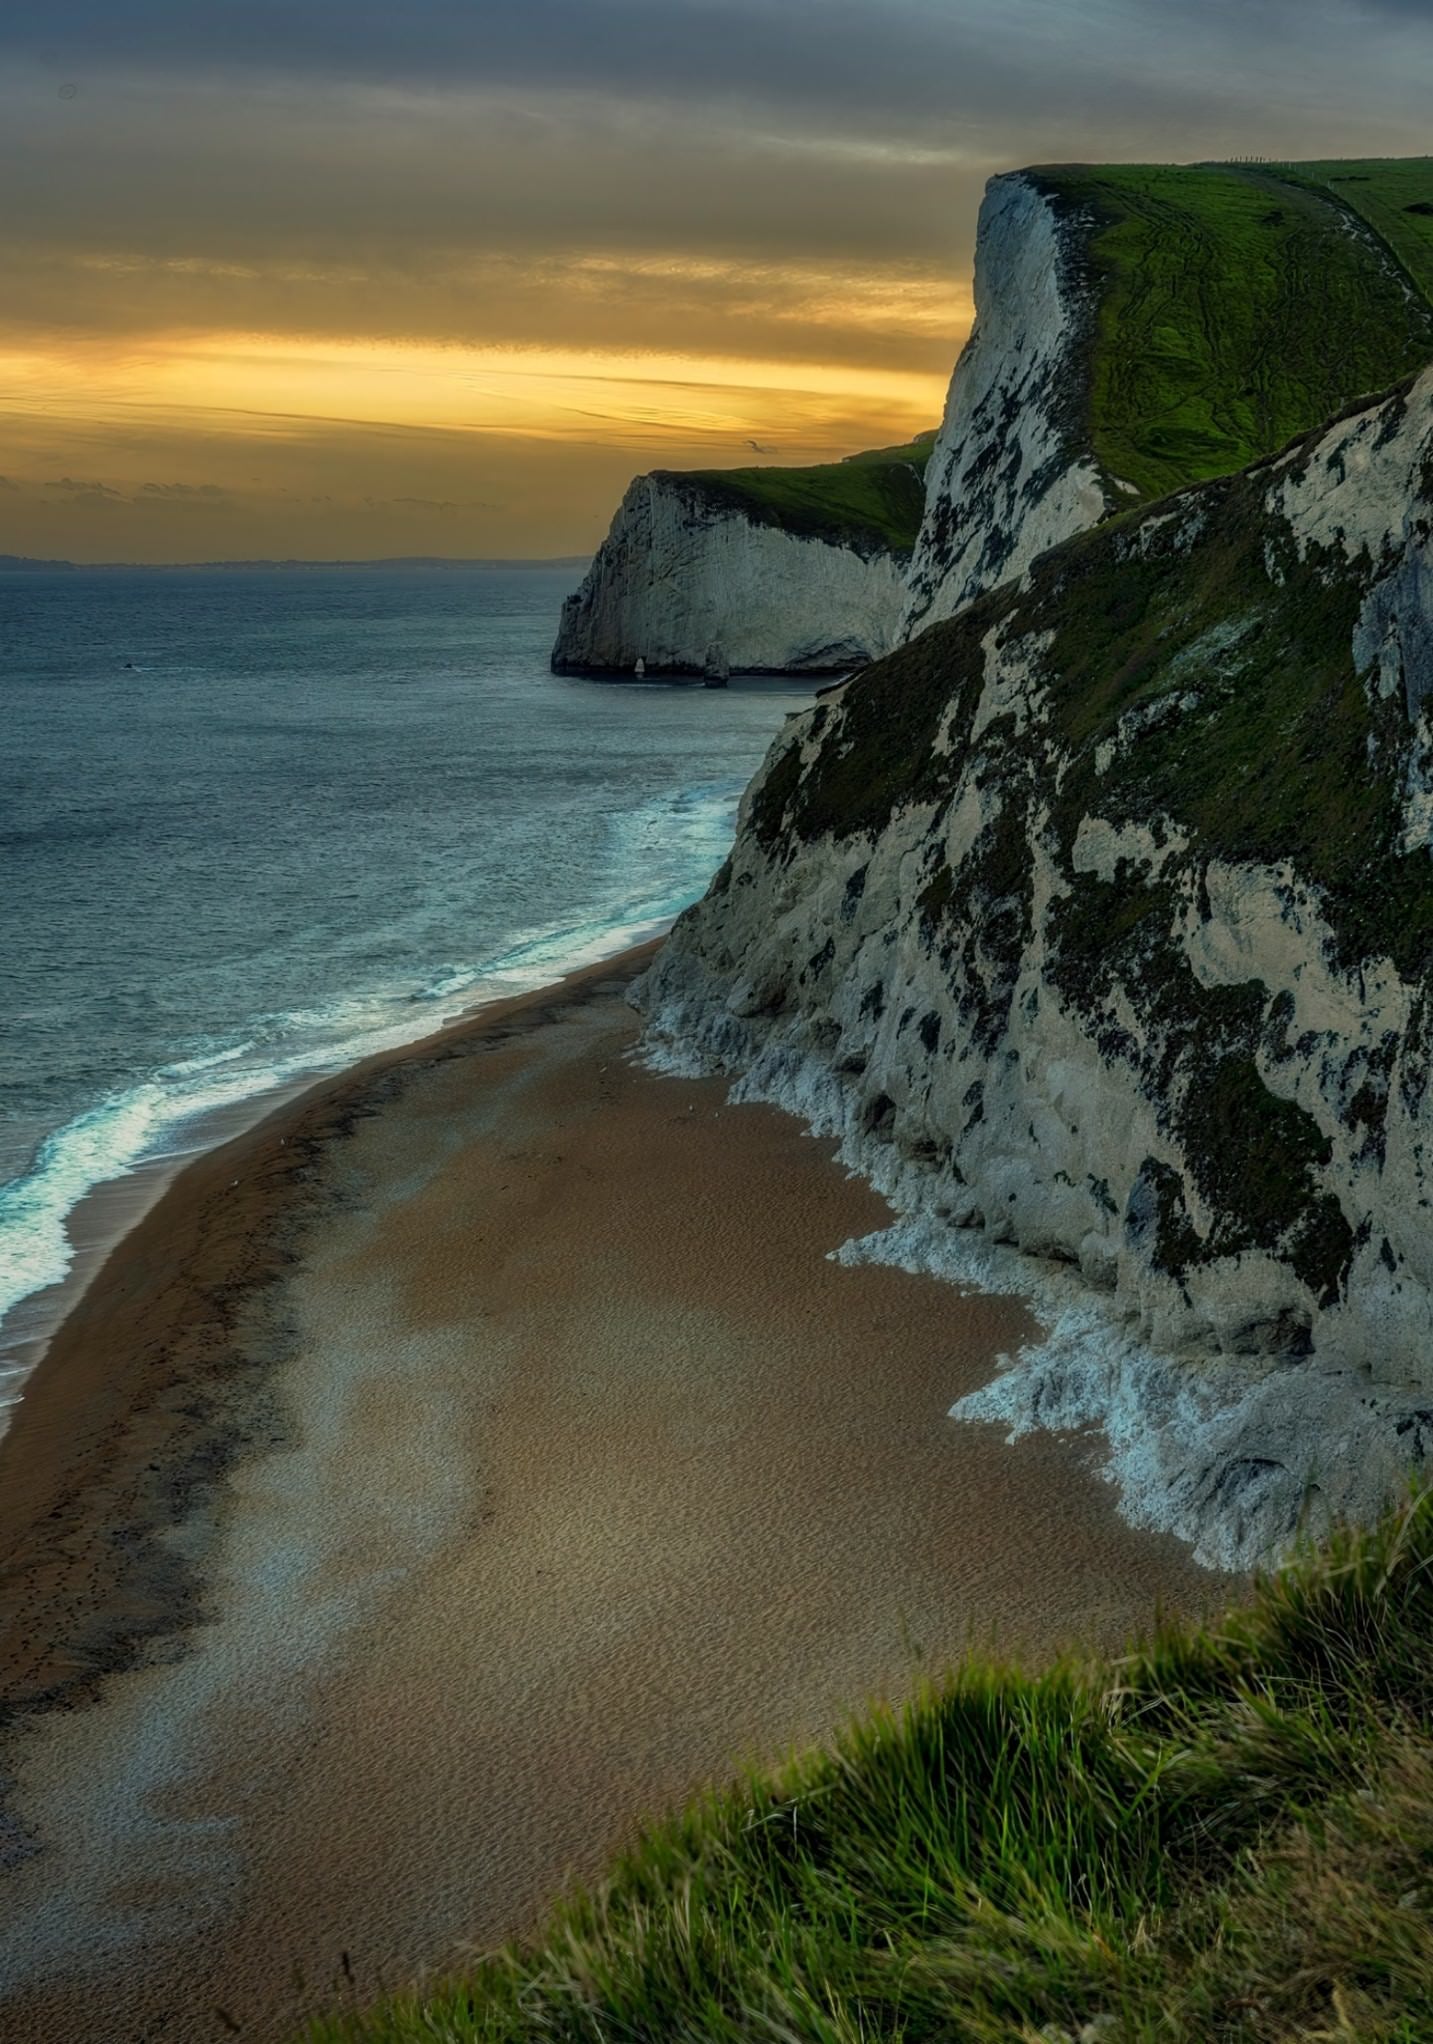 “Golden hues embrace the ancient cliffs along the stunning Jurassic Coast in England.” Photo by Raj Bose. Sony Alpha 7R IV. Sony 24-105mm f/4 G. 1/15-sec., f/10, ISO 160